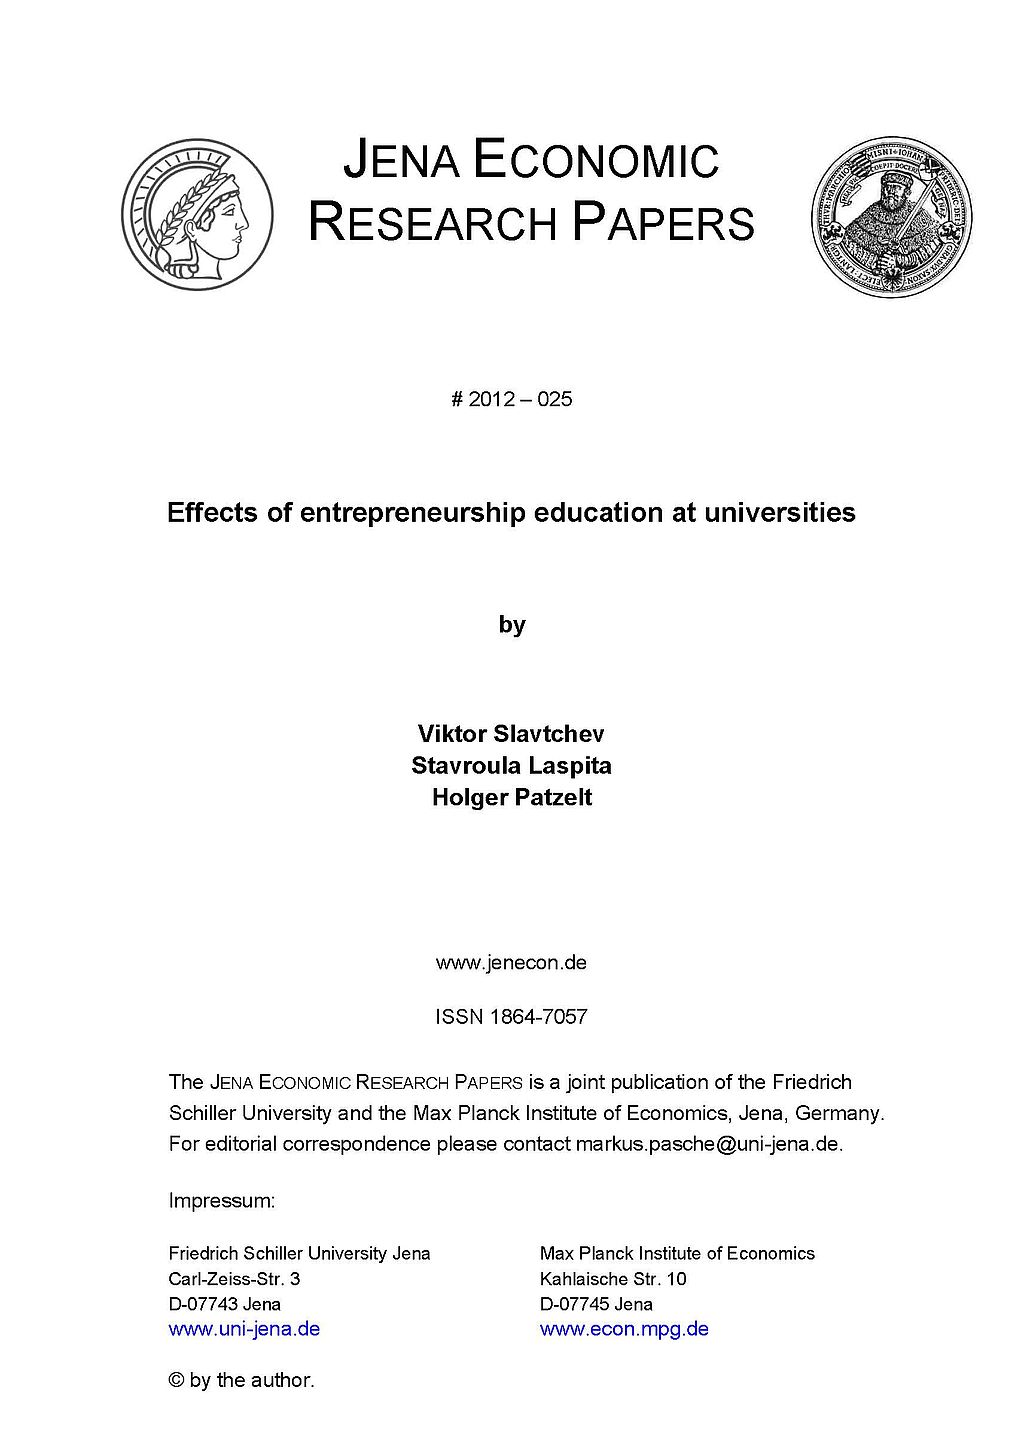 cover_Jena-Economic-Research-Papers_2012-25.jpg